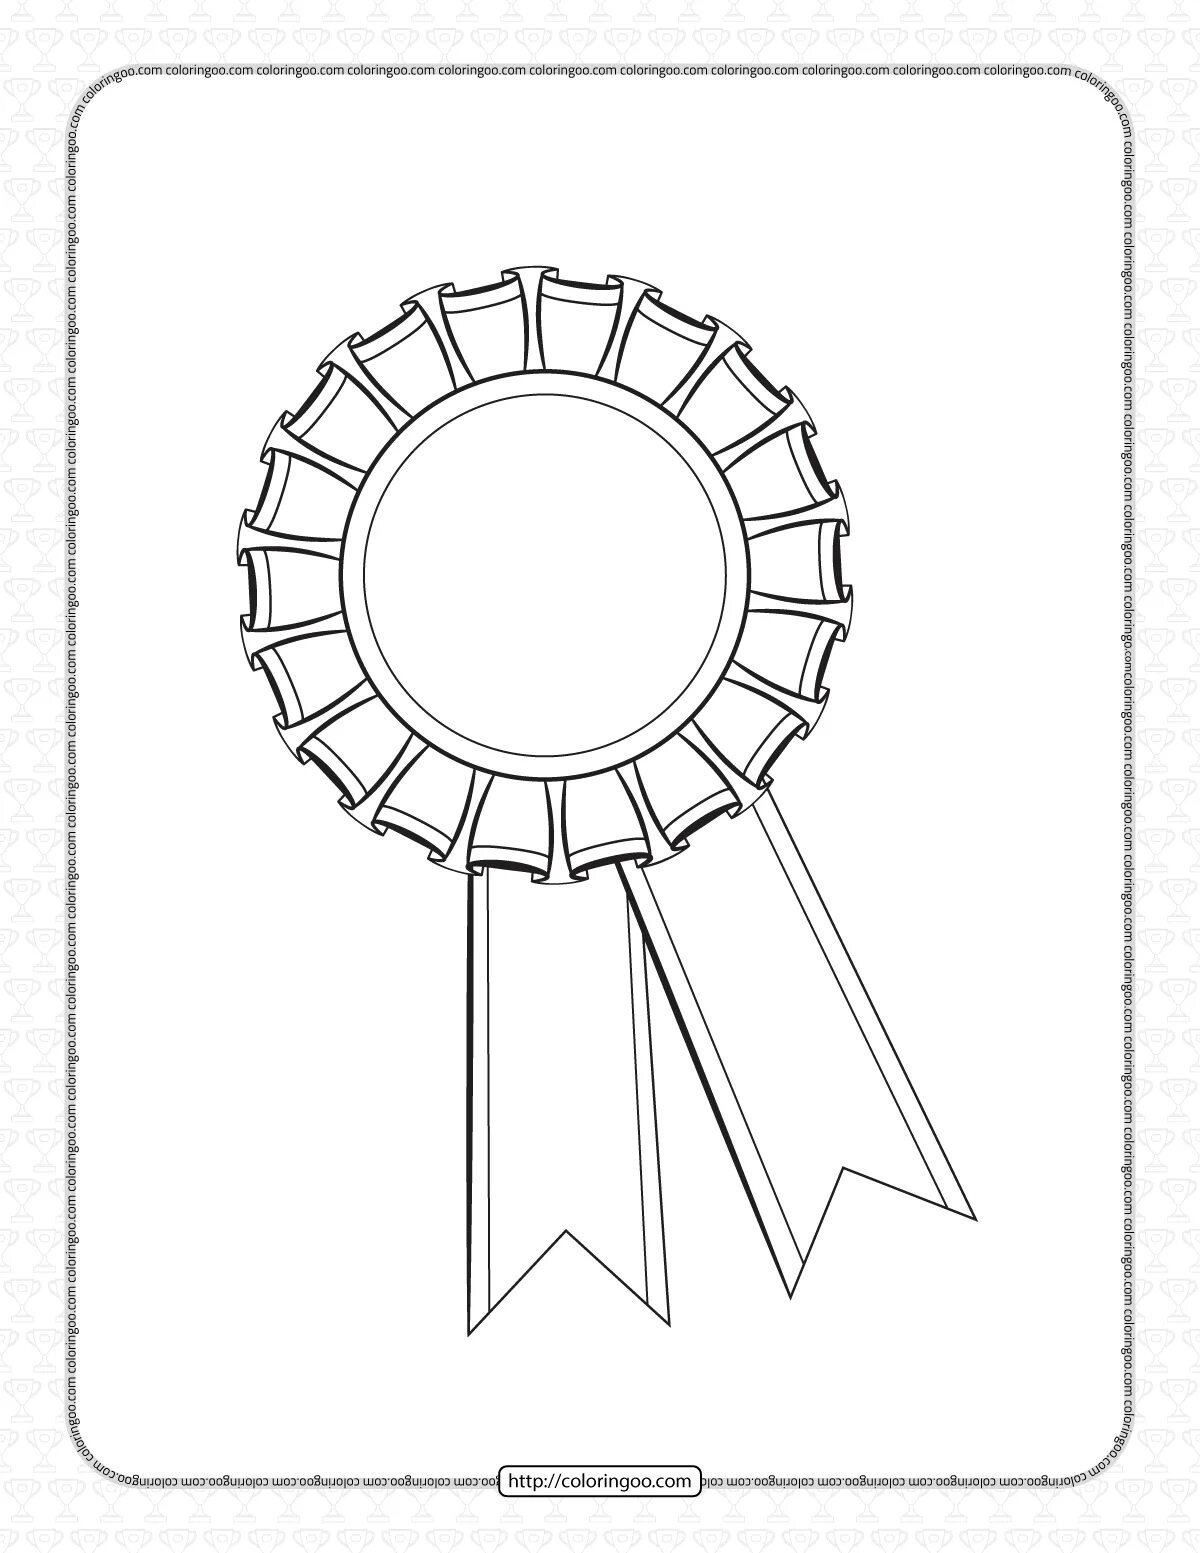 Bold medal coloring template